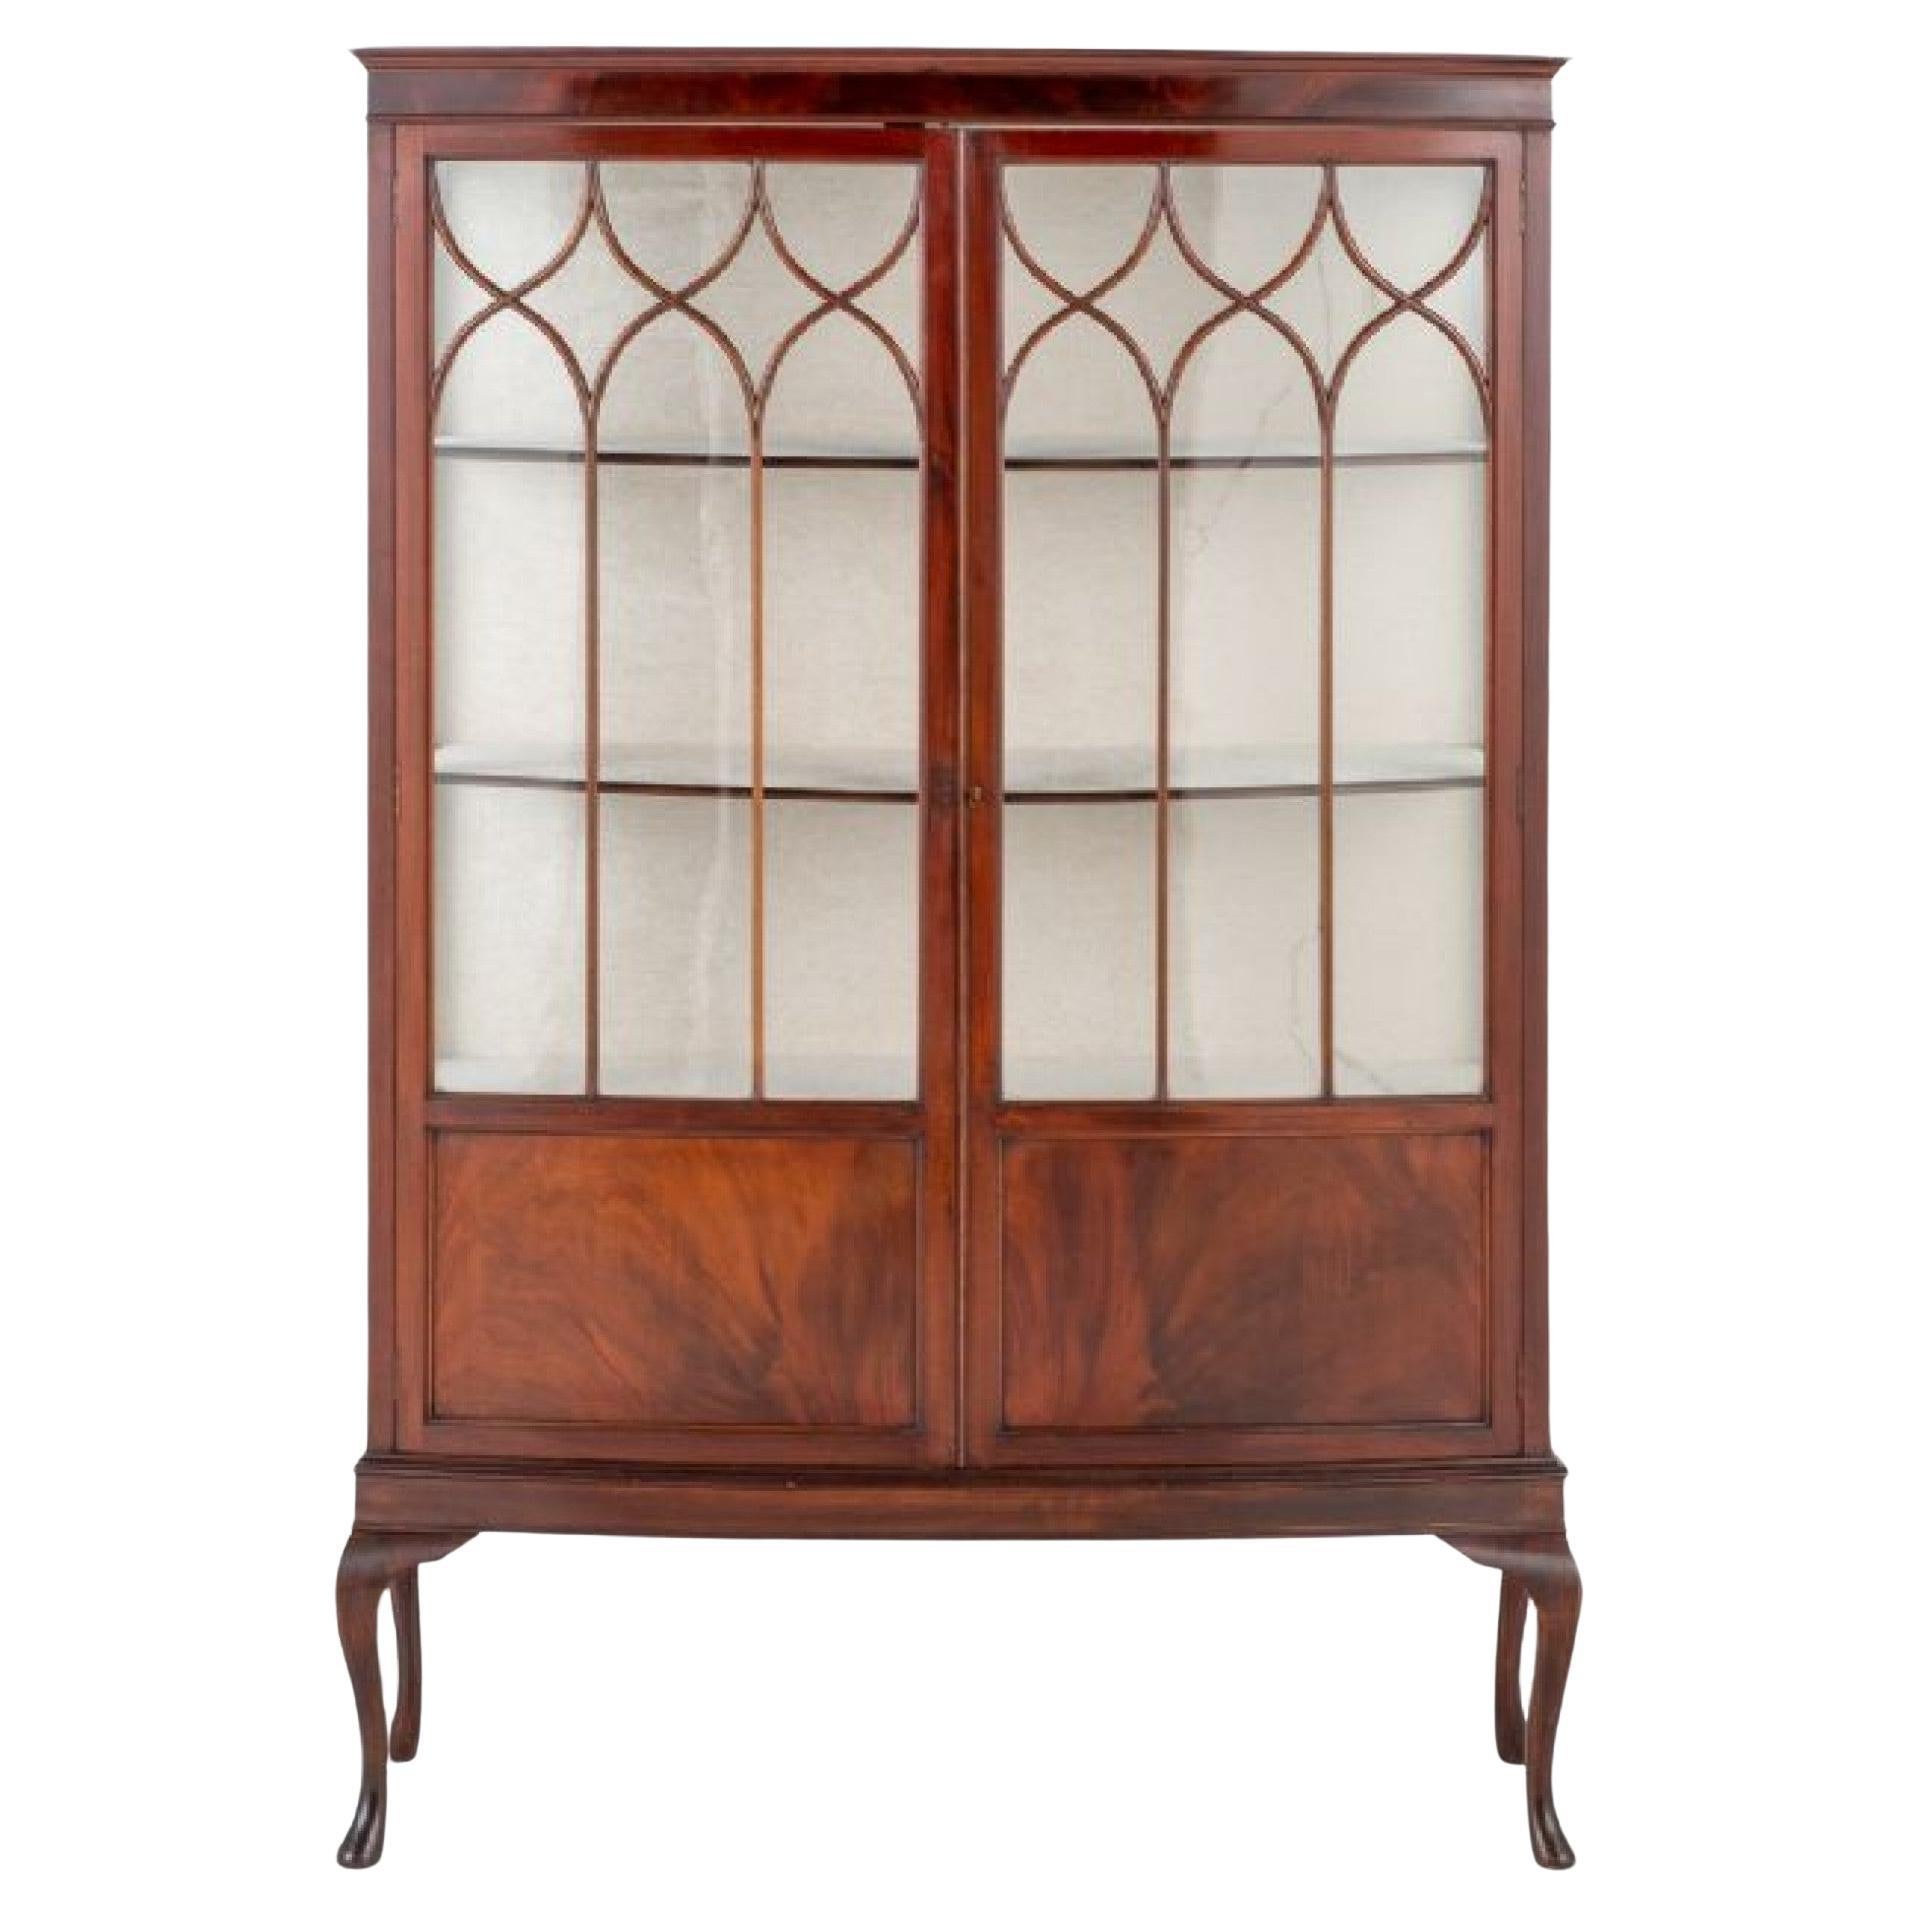 Queen Anne Display Cabinet Mahogany Bookcase